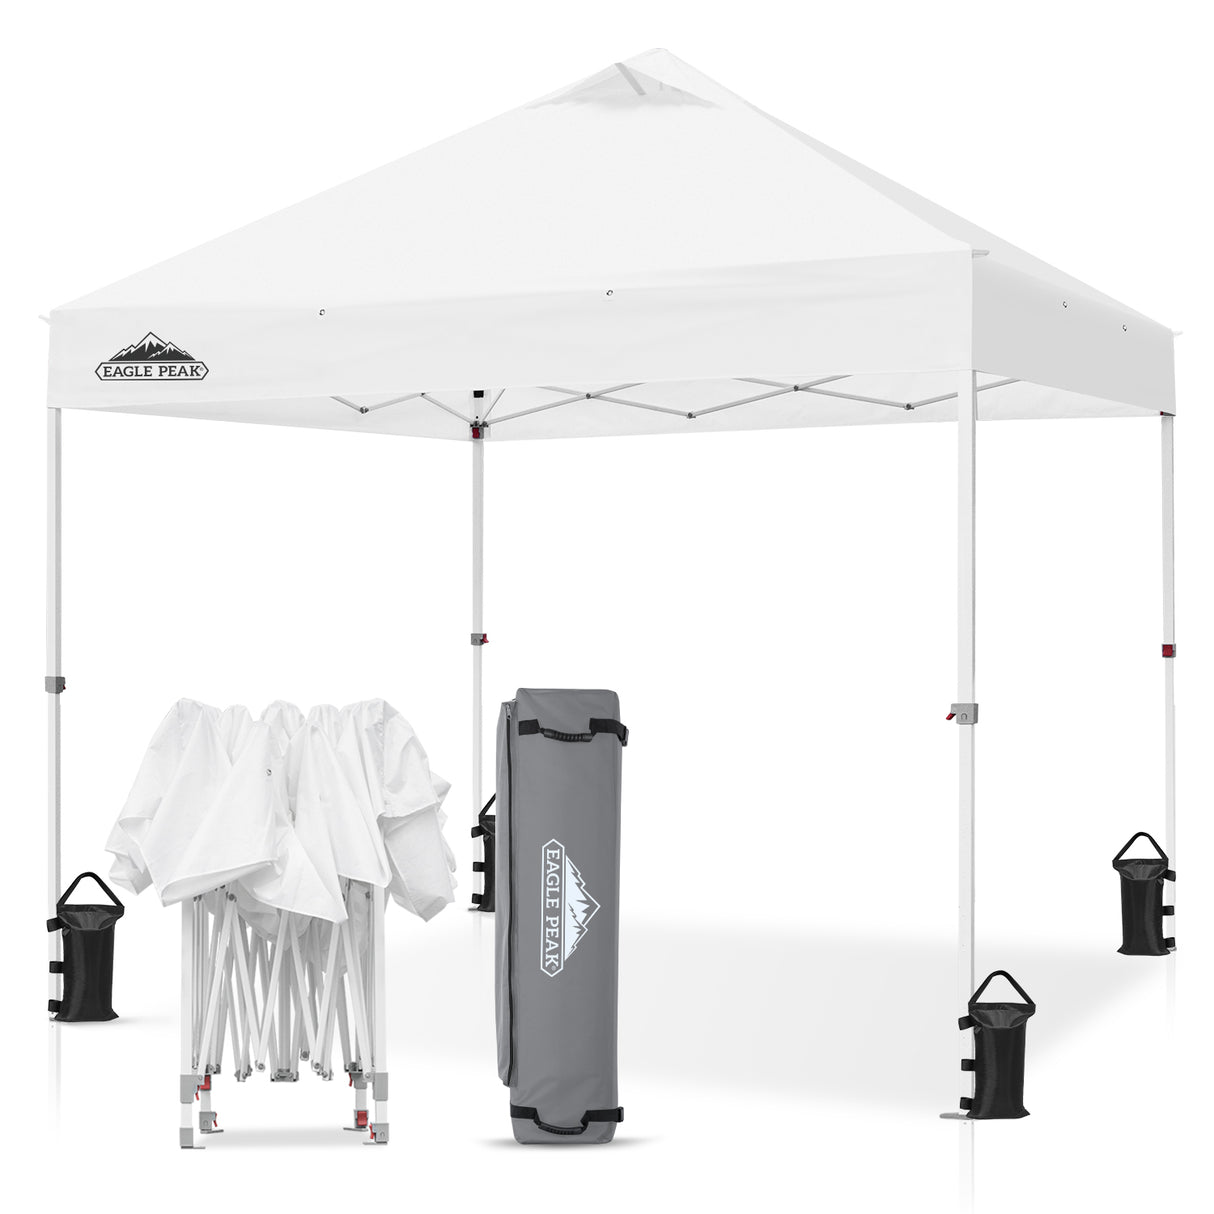 EAGLE PEAK CP100 10x10 Heavy Duty Industrial Commercial Canopy Tent with 100 Sqft of Shade (White)